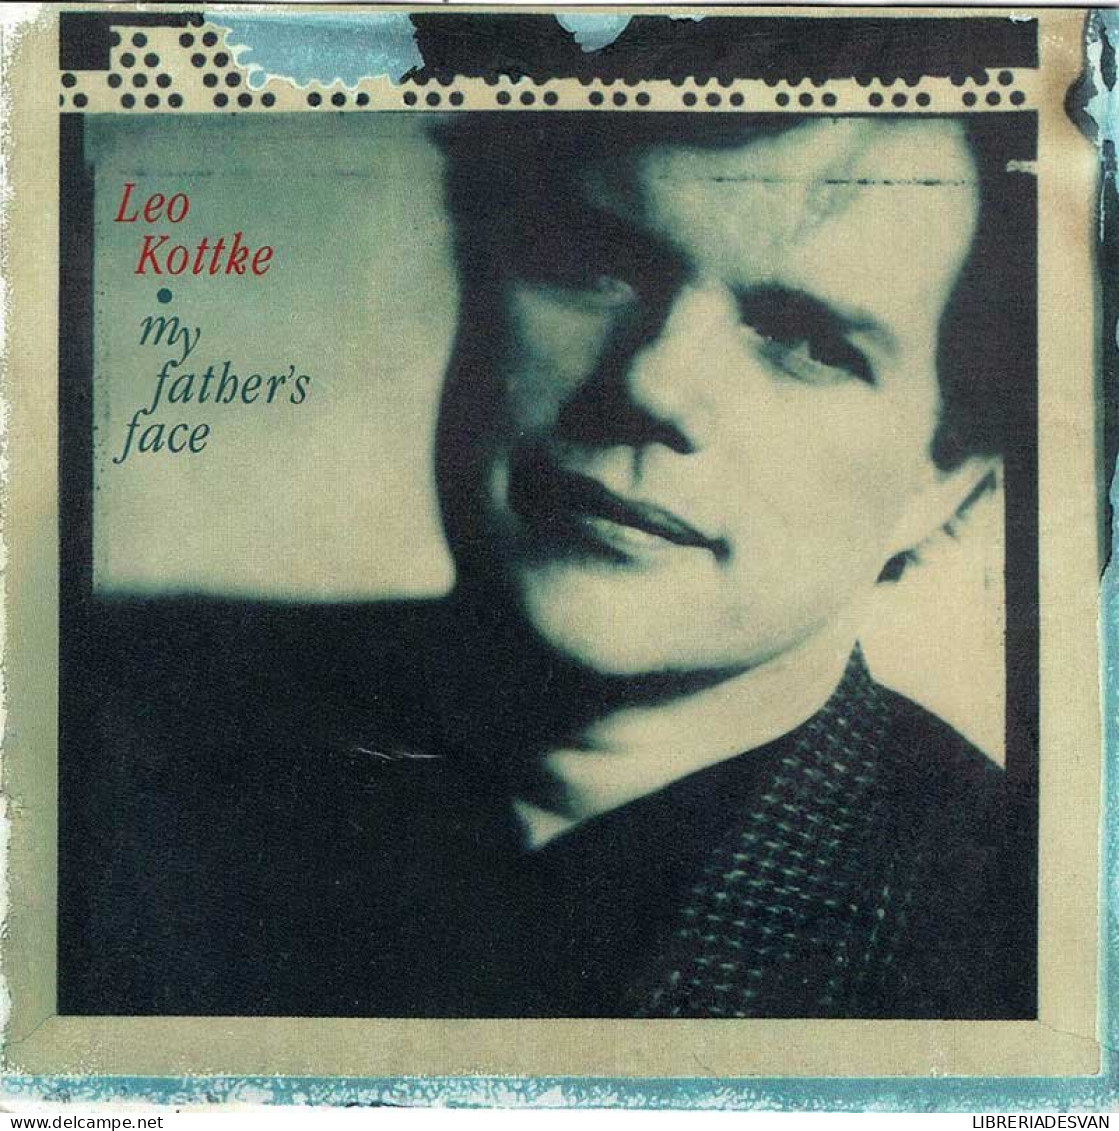 Leo Kottke - My Fathers Face. CD - New Age